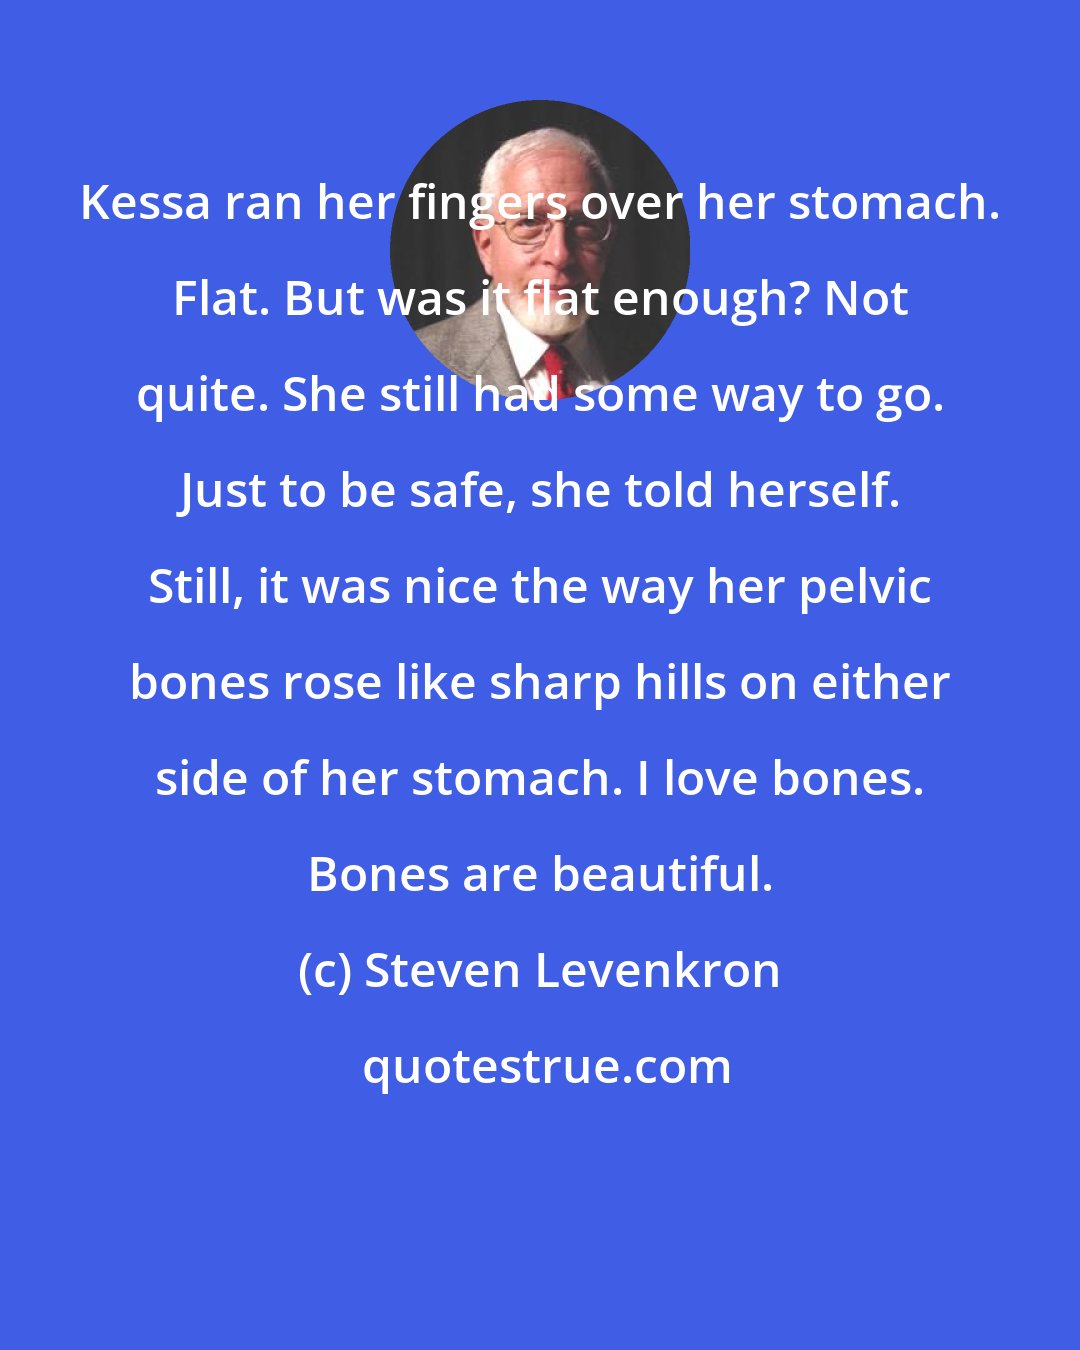 Steven Levenkron: Kessa ran her fingers over her stomach. Flat. But was it flat enough? Not quite. She still had some way to go. Just to be safe, she told herself. Still, it was nice the way her pelvic bones rose like sharp hills on either side of her stomach. I love bones. Bones are beautiful.